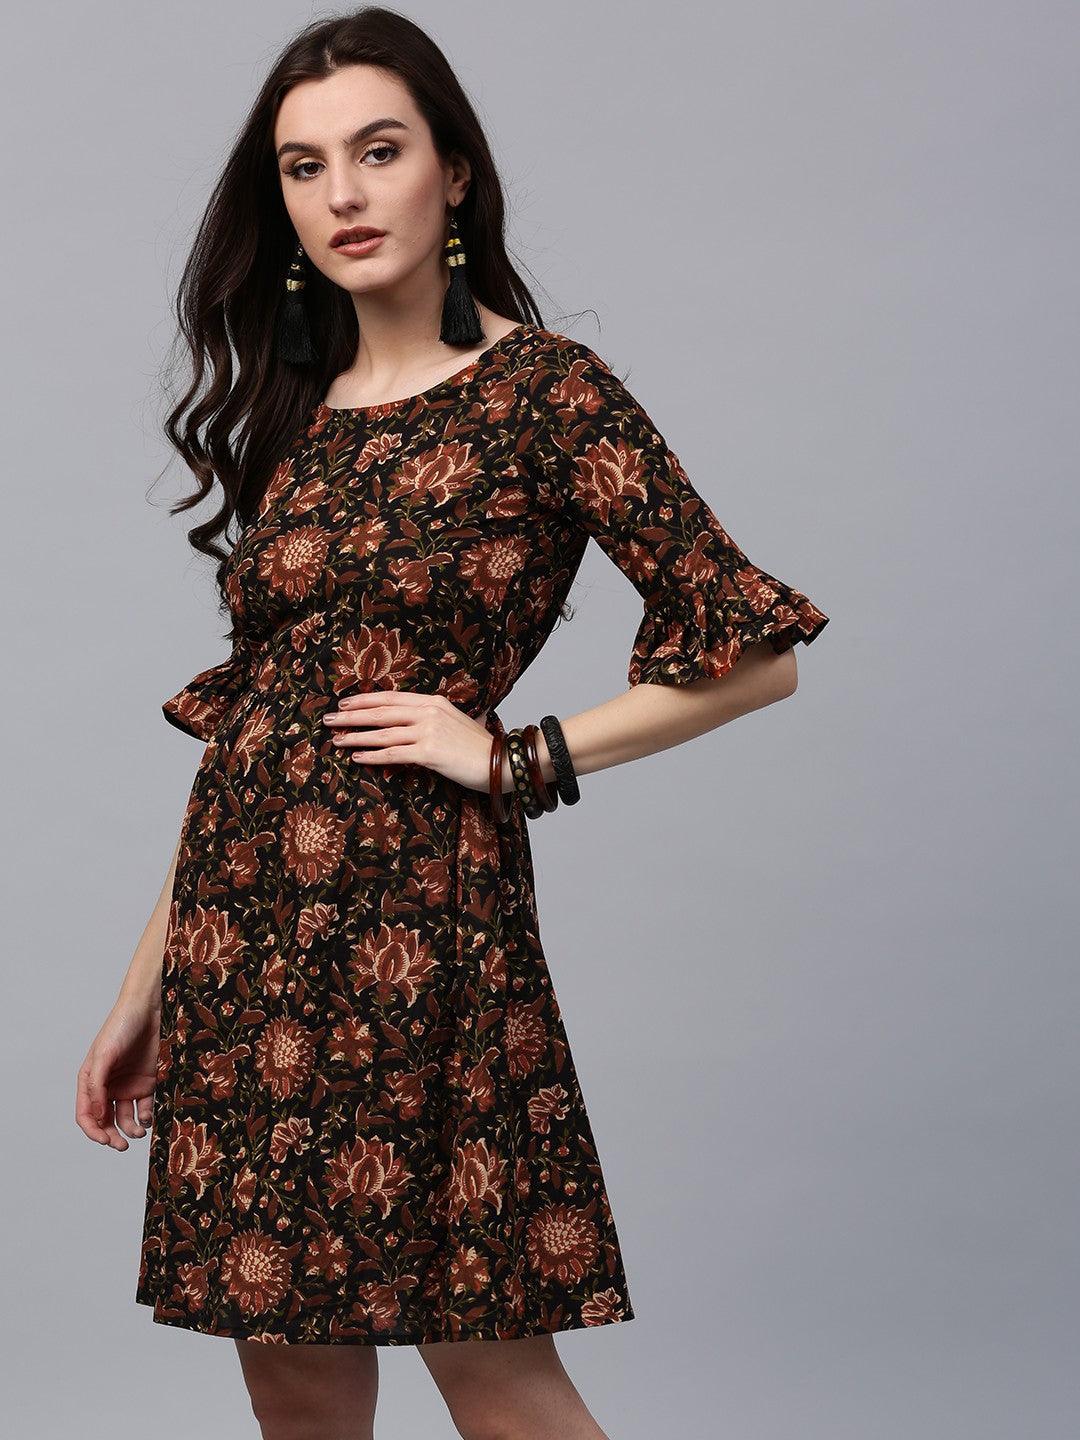 Black &amp; Brown Floral Printed Skater Dress (Fully Stitched) - Znxclothing